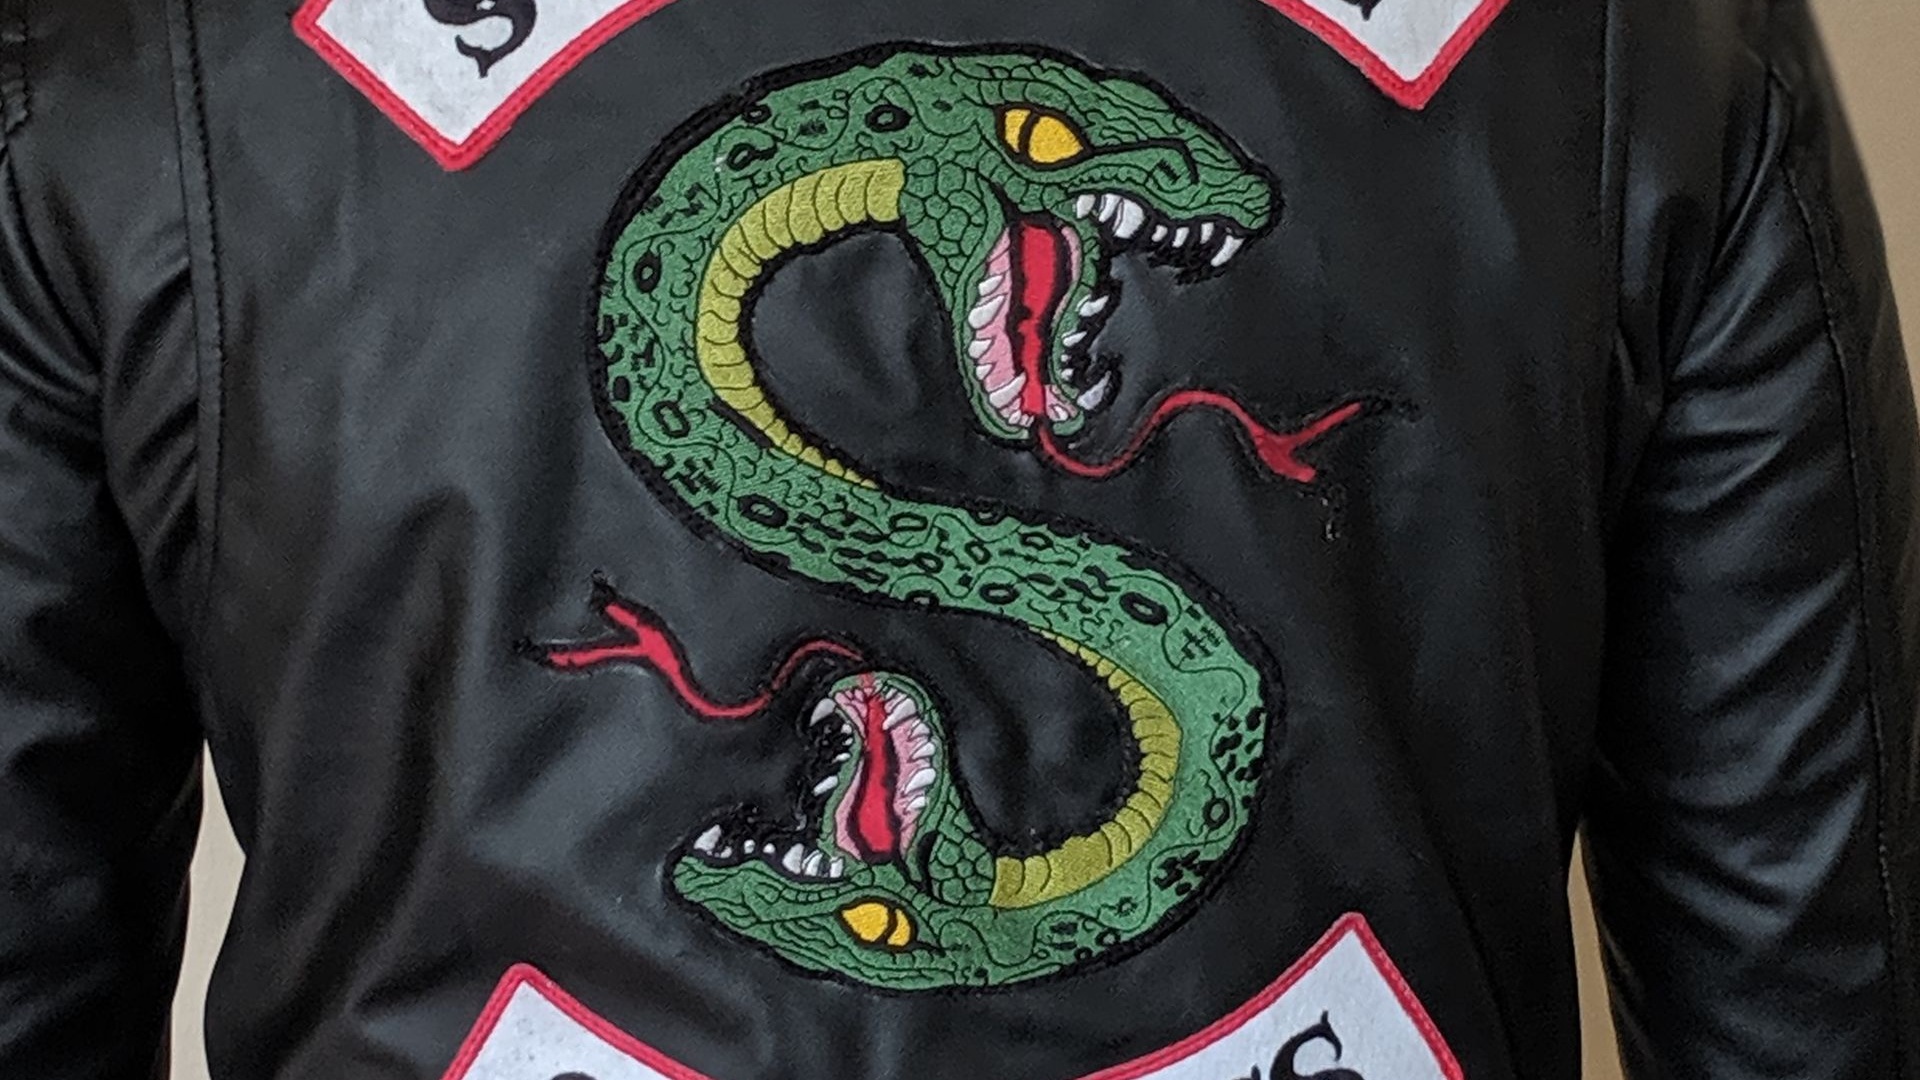 This RIVERDALE Southside Serpents Jacket is Not My Cup of Tea But is a Solid Jacket — GeekTyrant